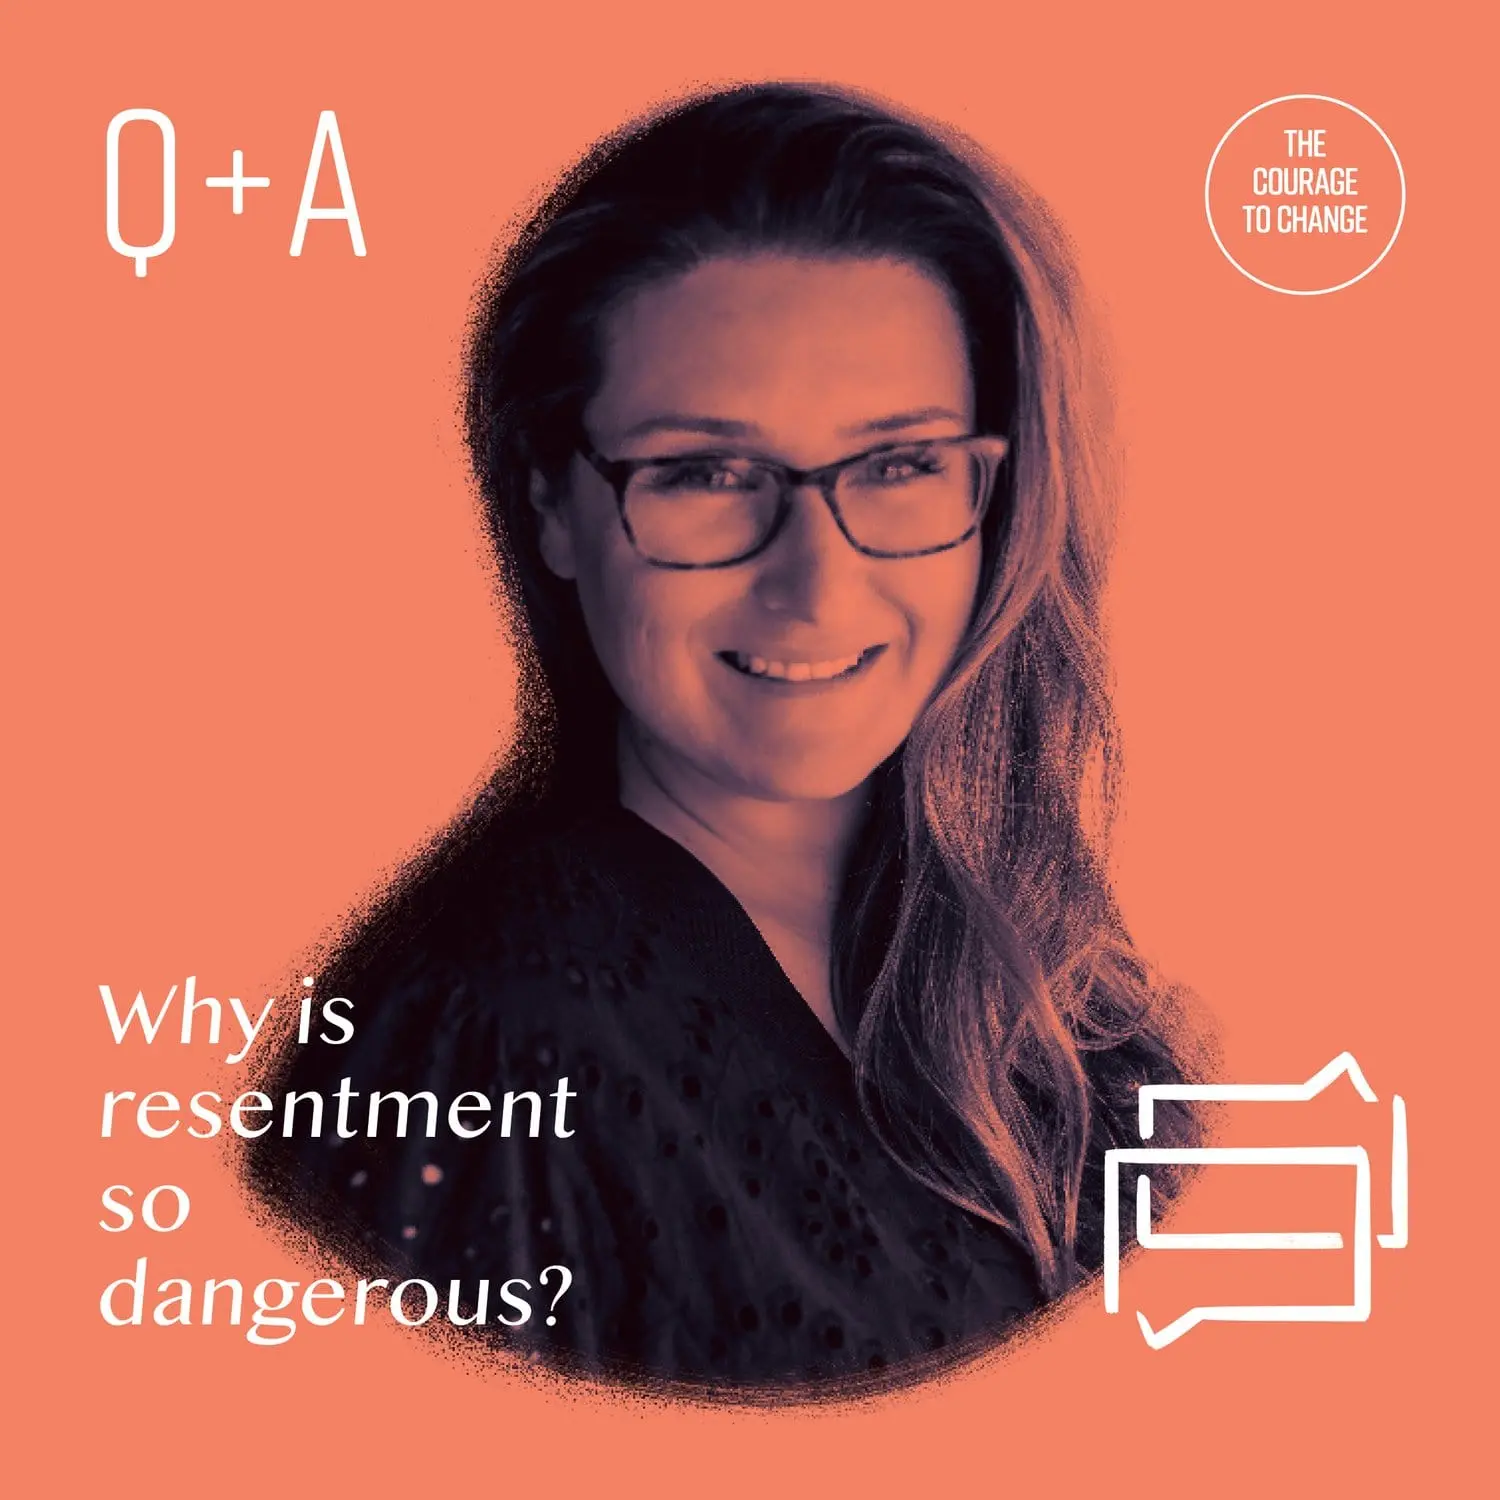 Q+A Why Is Resentment So Dangerous?